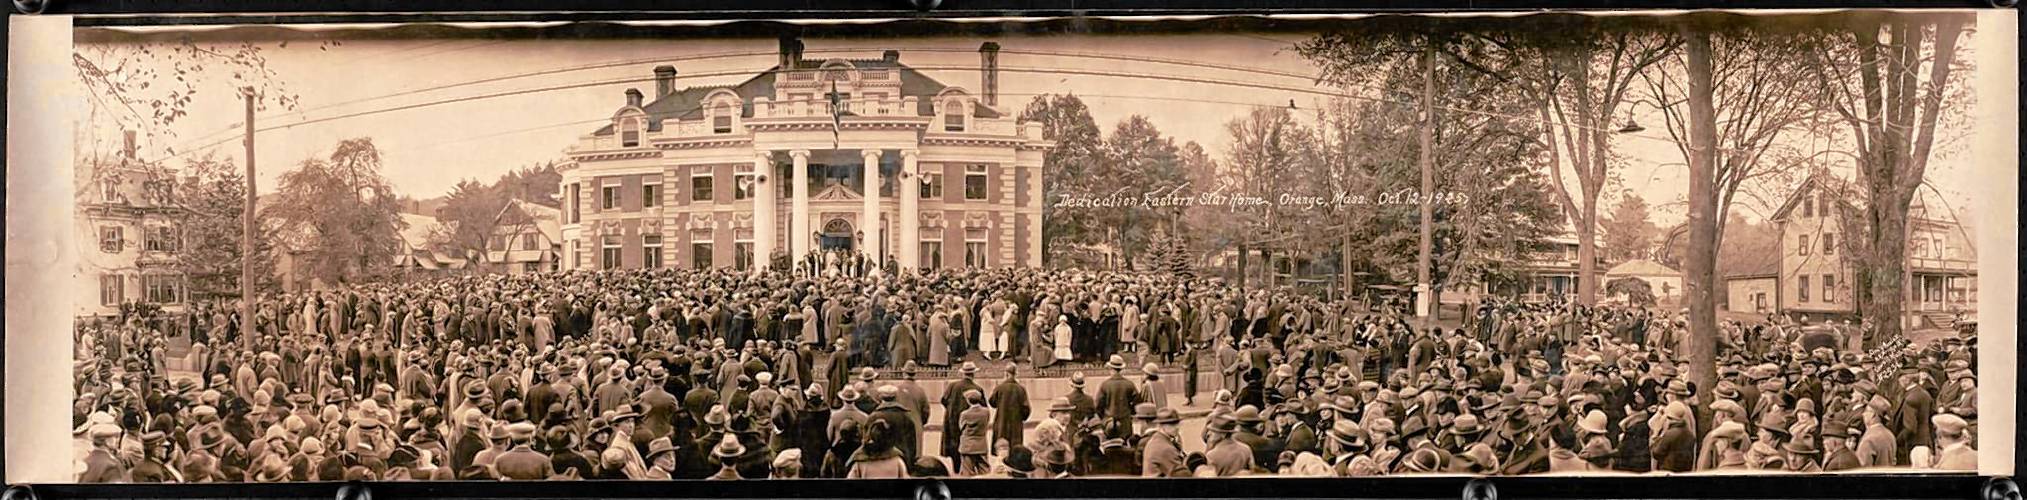 The photo was taken in October 1925 at the opening of the Eastern Star Home, formerly the Wheeler Mansion. The event attracted over 1,000 people. Cynthia Butler, current owner of the mansion, is hoping to recreate the 1925 photo. 